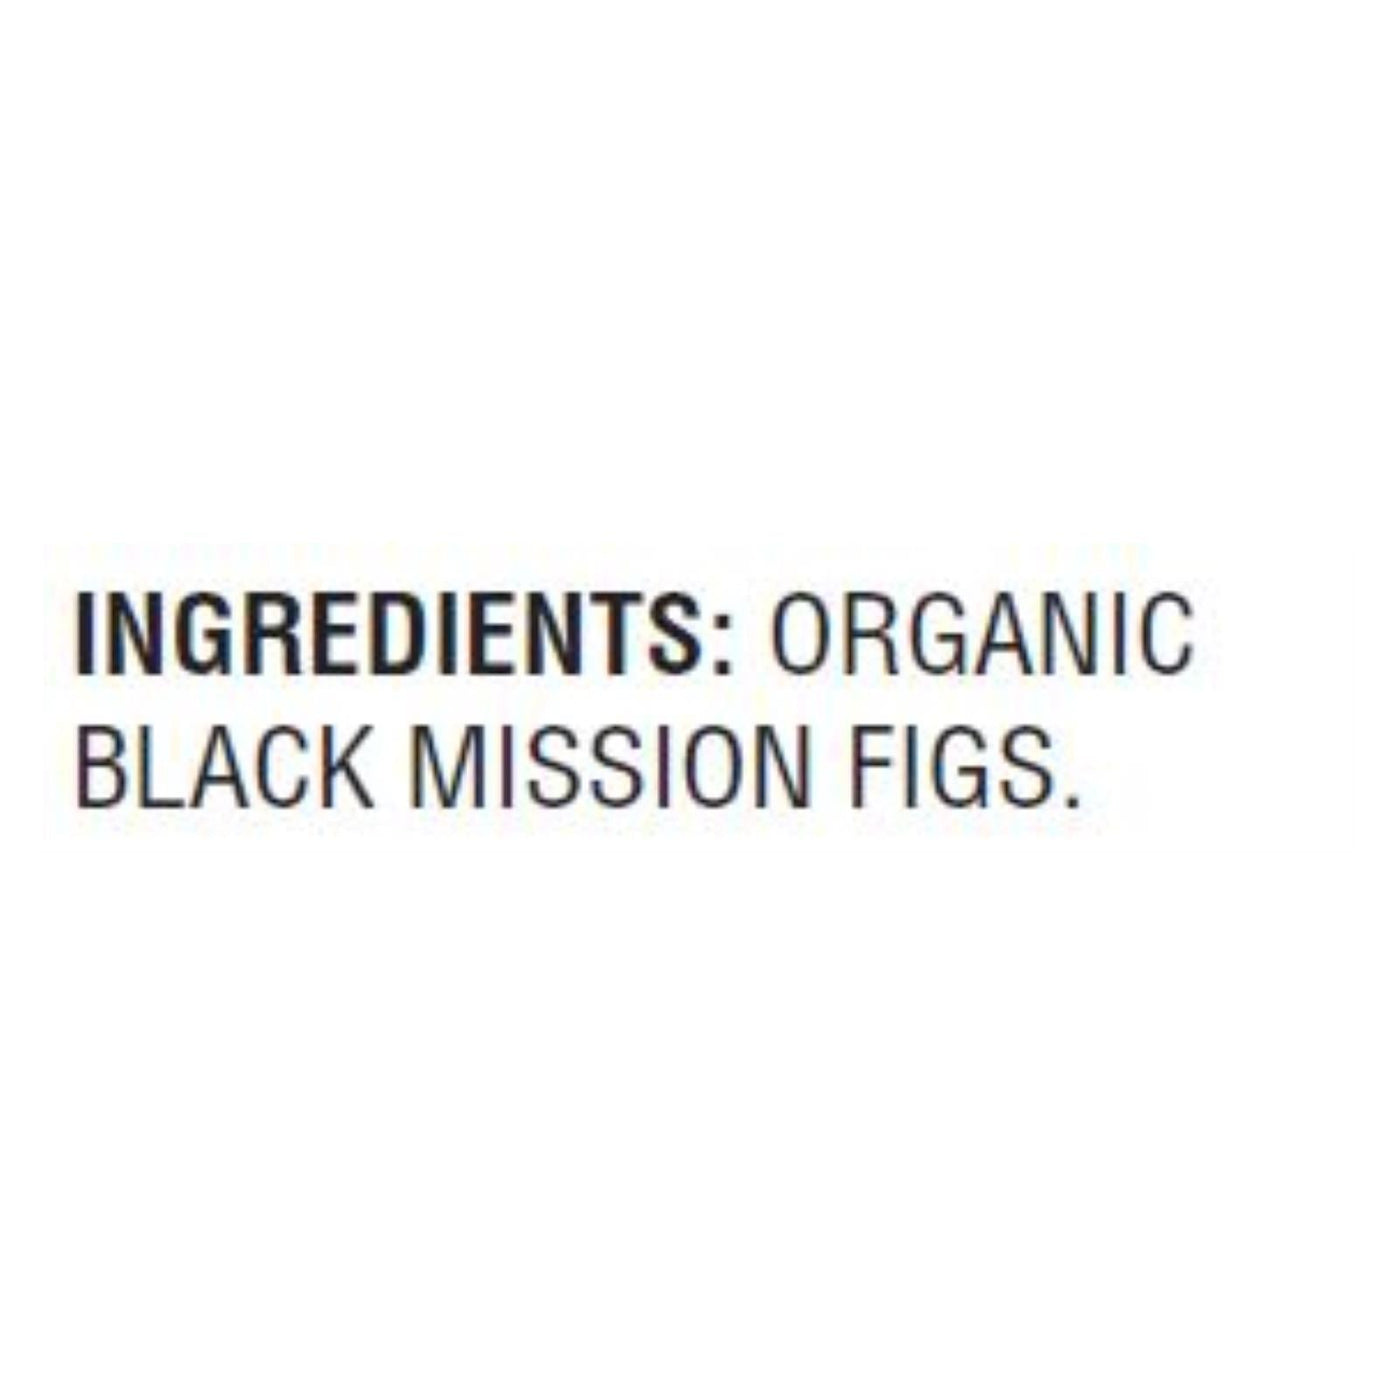 Buy Woodstock Organic Unsweetened Black Mission Figs - Case Of 8 - 10 Oz  at OnlyNaturals.us